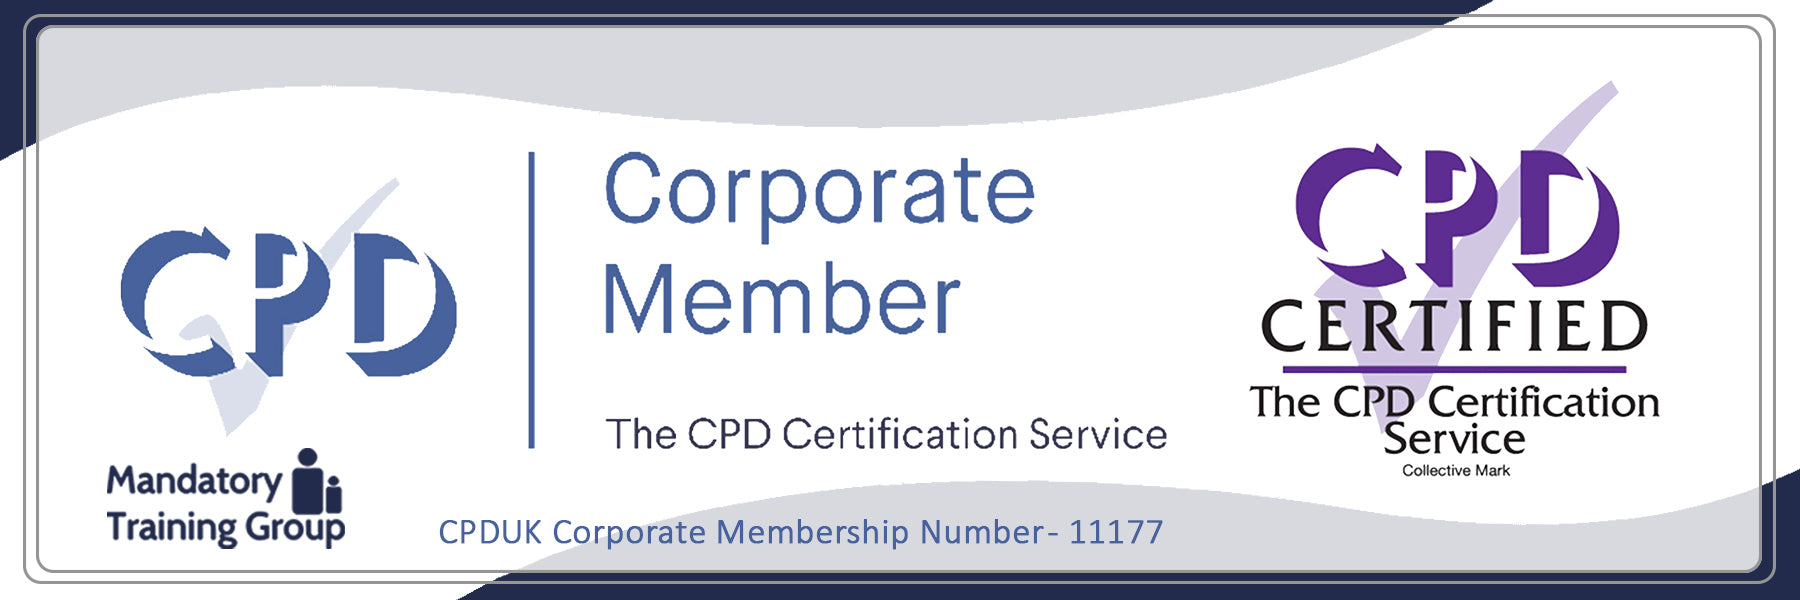 Care Certificate Standard 15 + Train the Trainer + Trainer Pack - CPDUK Accredited - The Mandatory Training Group UK -